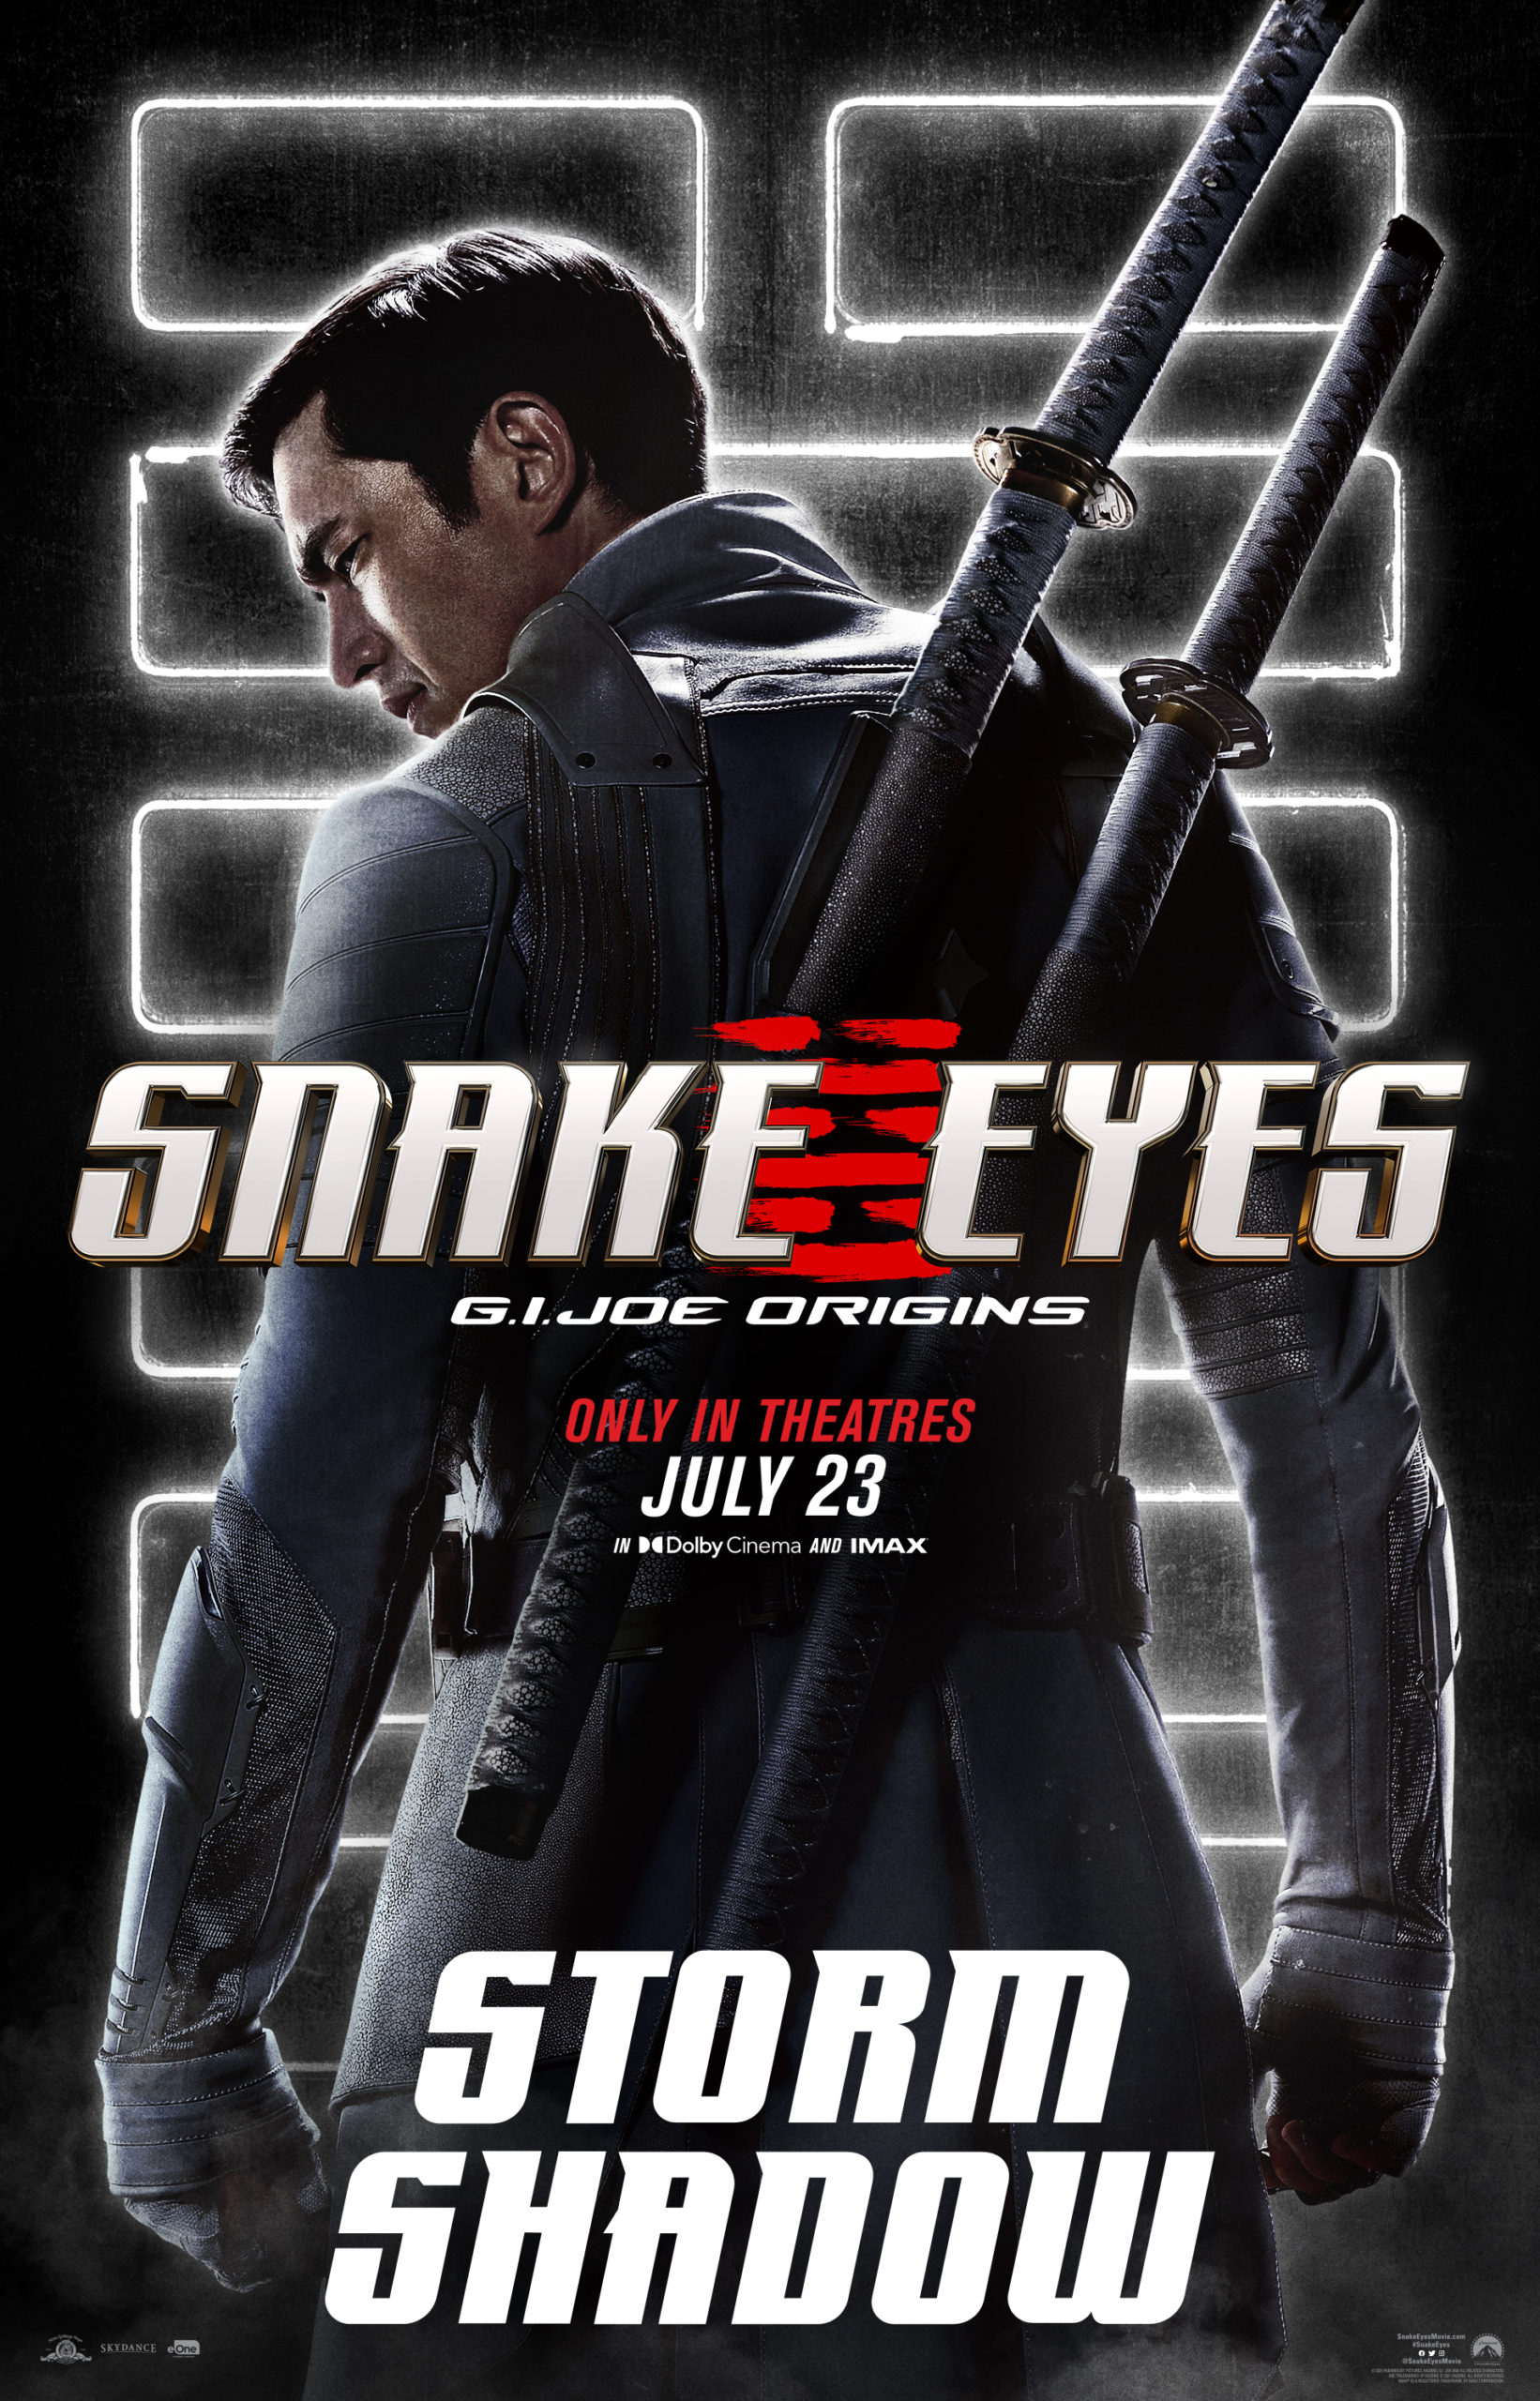 Check Out New Character Posters for Snake Eyes: G.I. Joe Origins